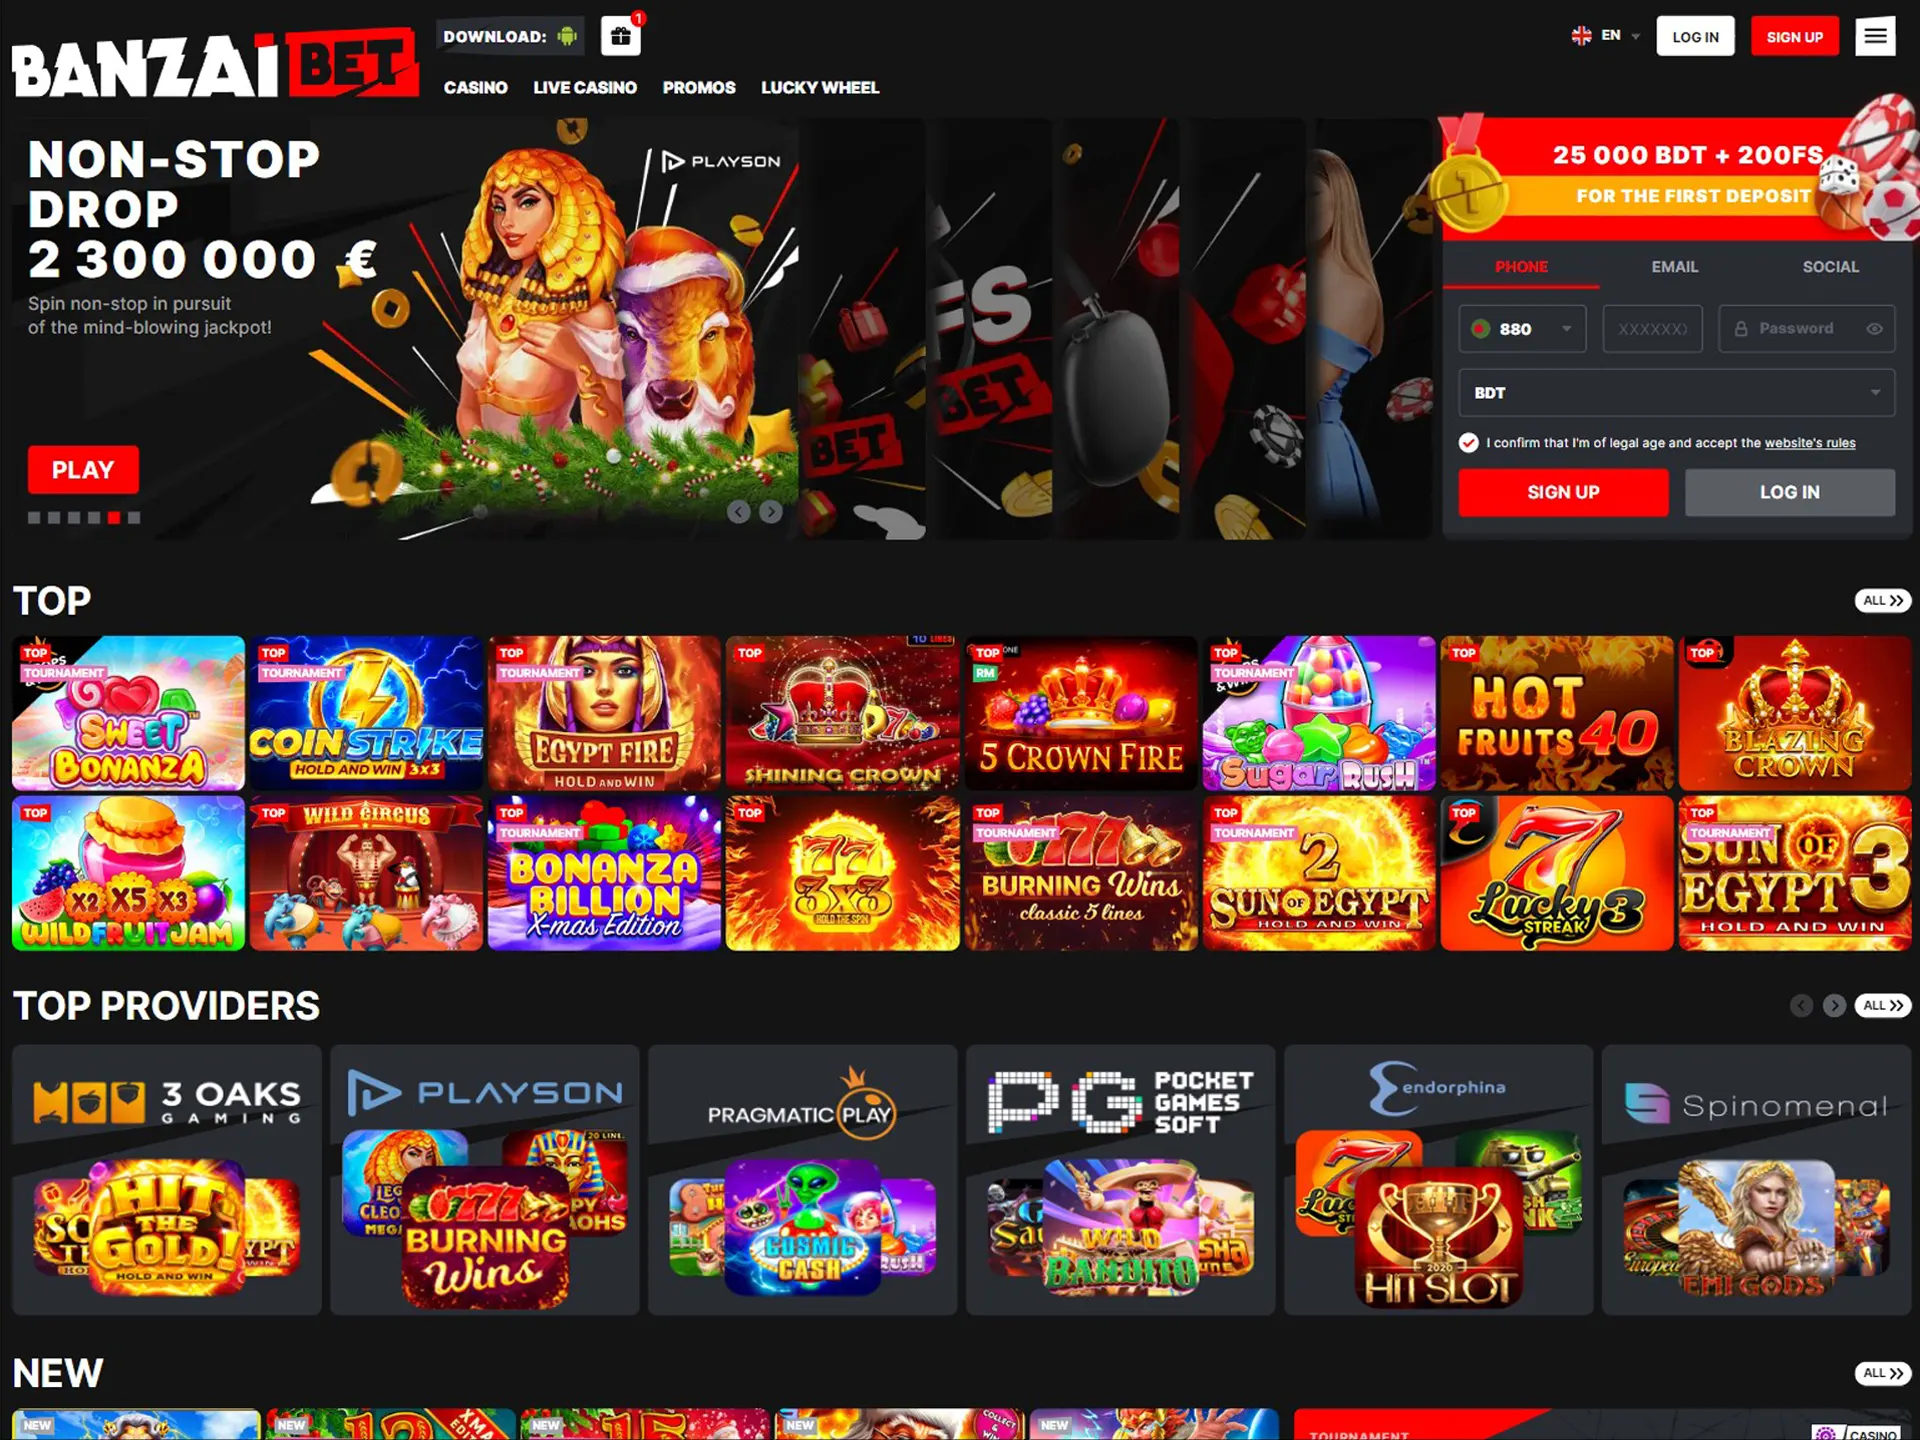 Use the link and go to the official website of Banzai Bet Casino.